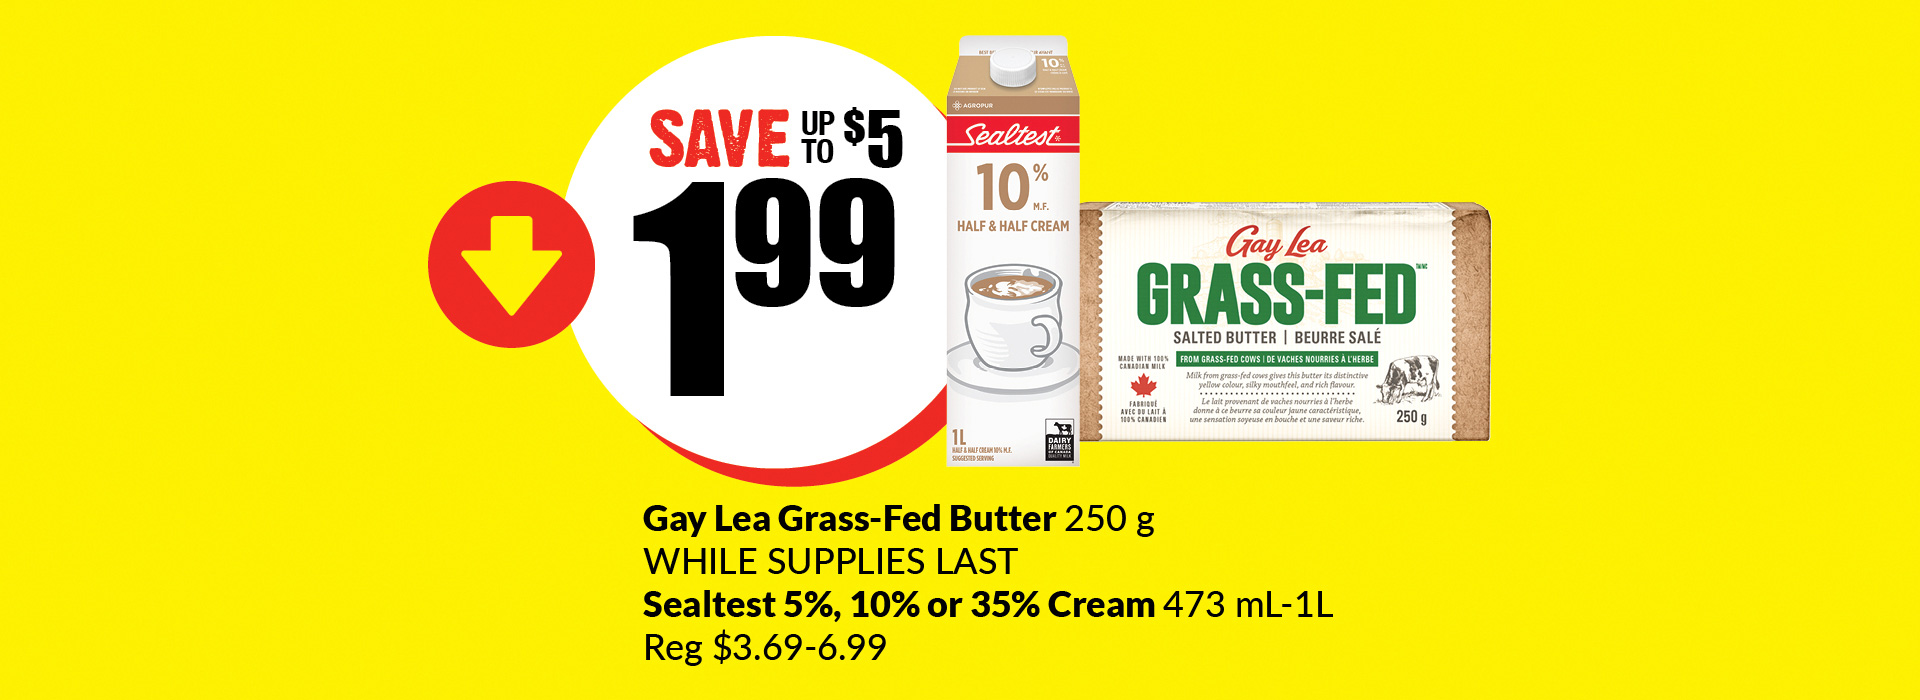 Text Reading 'Buy Gay Lea Grass-Fed Butter (250 g) and Sealtest 5%, 10% or 35% Cream (473 mL-1L) for just $1.99 and save up to $5.'